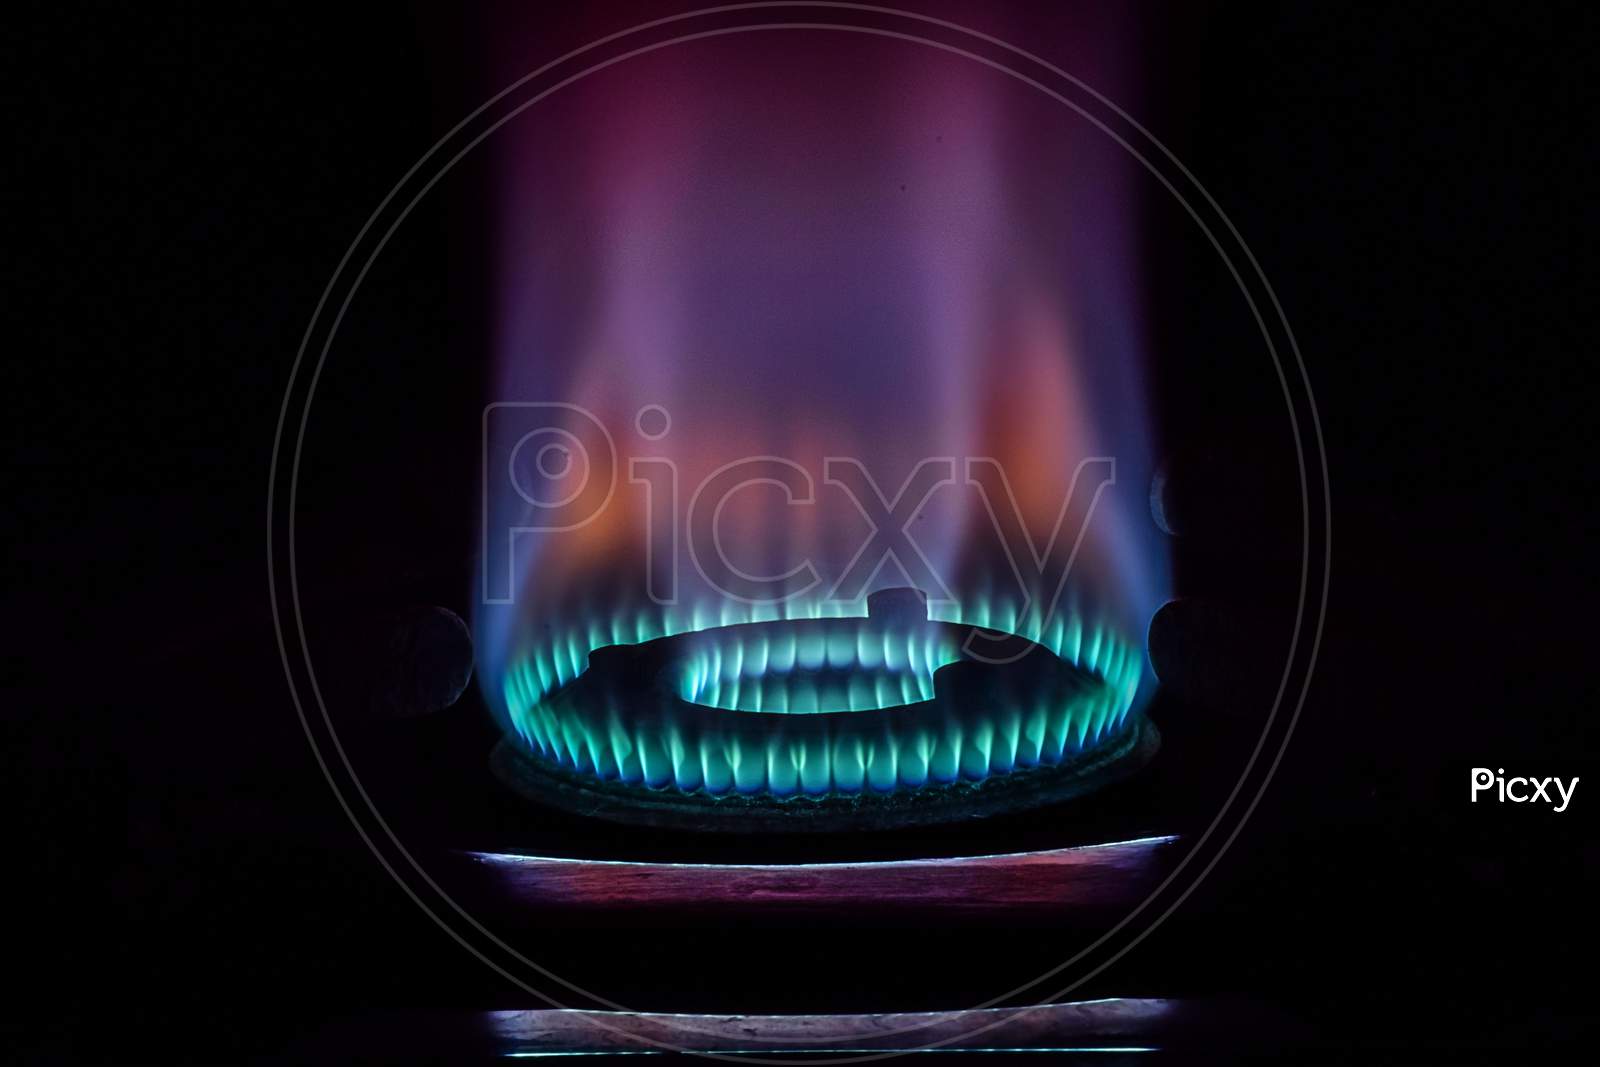 Stock Photo Of Gas Burner With Blue And Purple Flame On Kitchen Stove In Dark Black Background, Focus On Object.